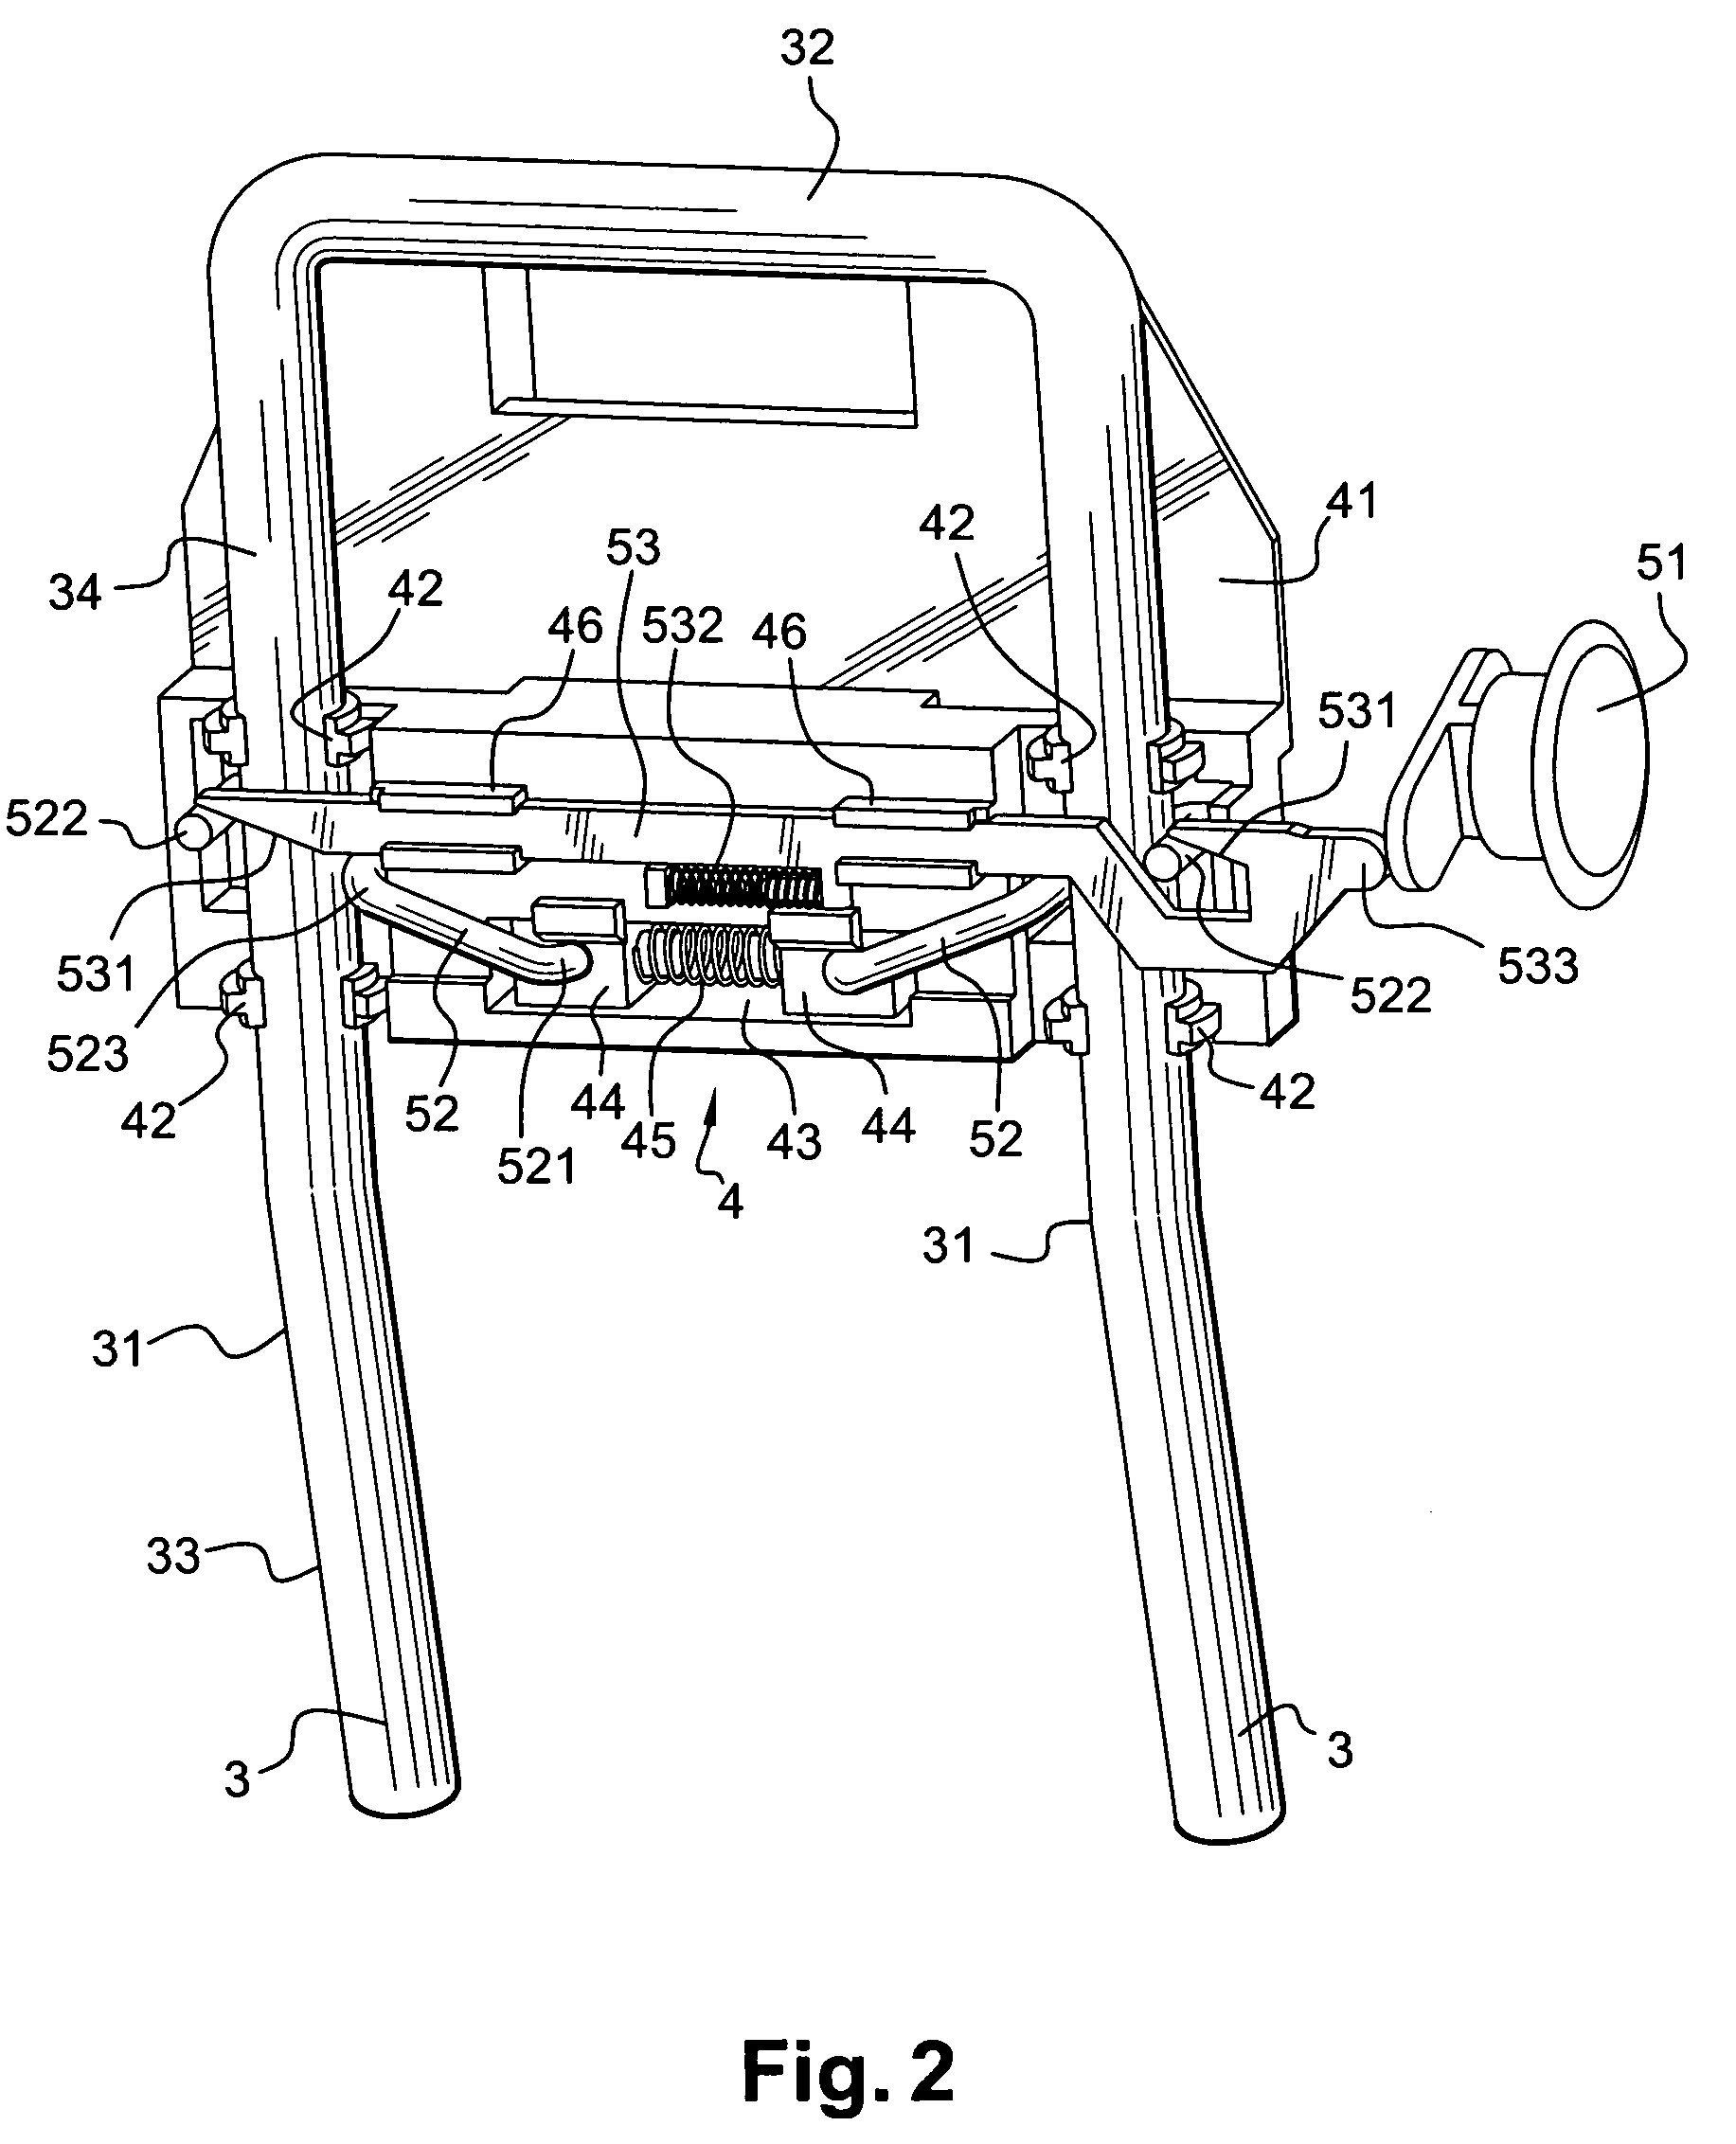 Translation movement guidance mechanism with positional locking, for adjustable elements of an automobile vehicle seat